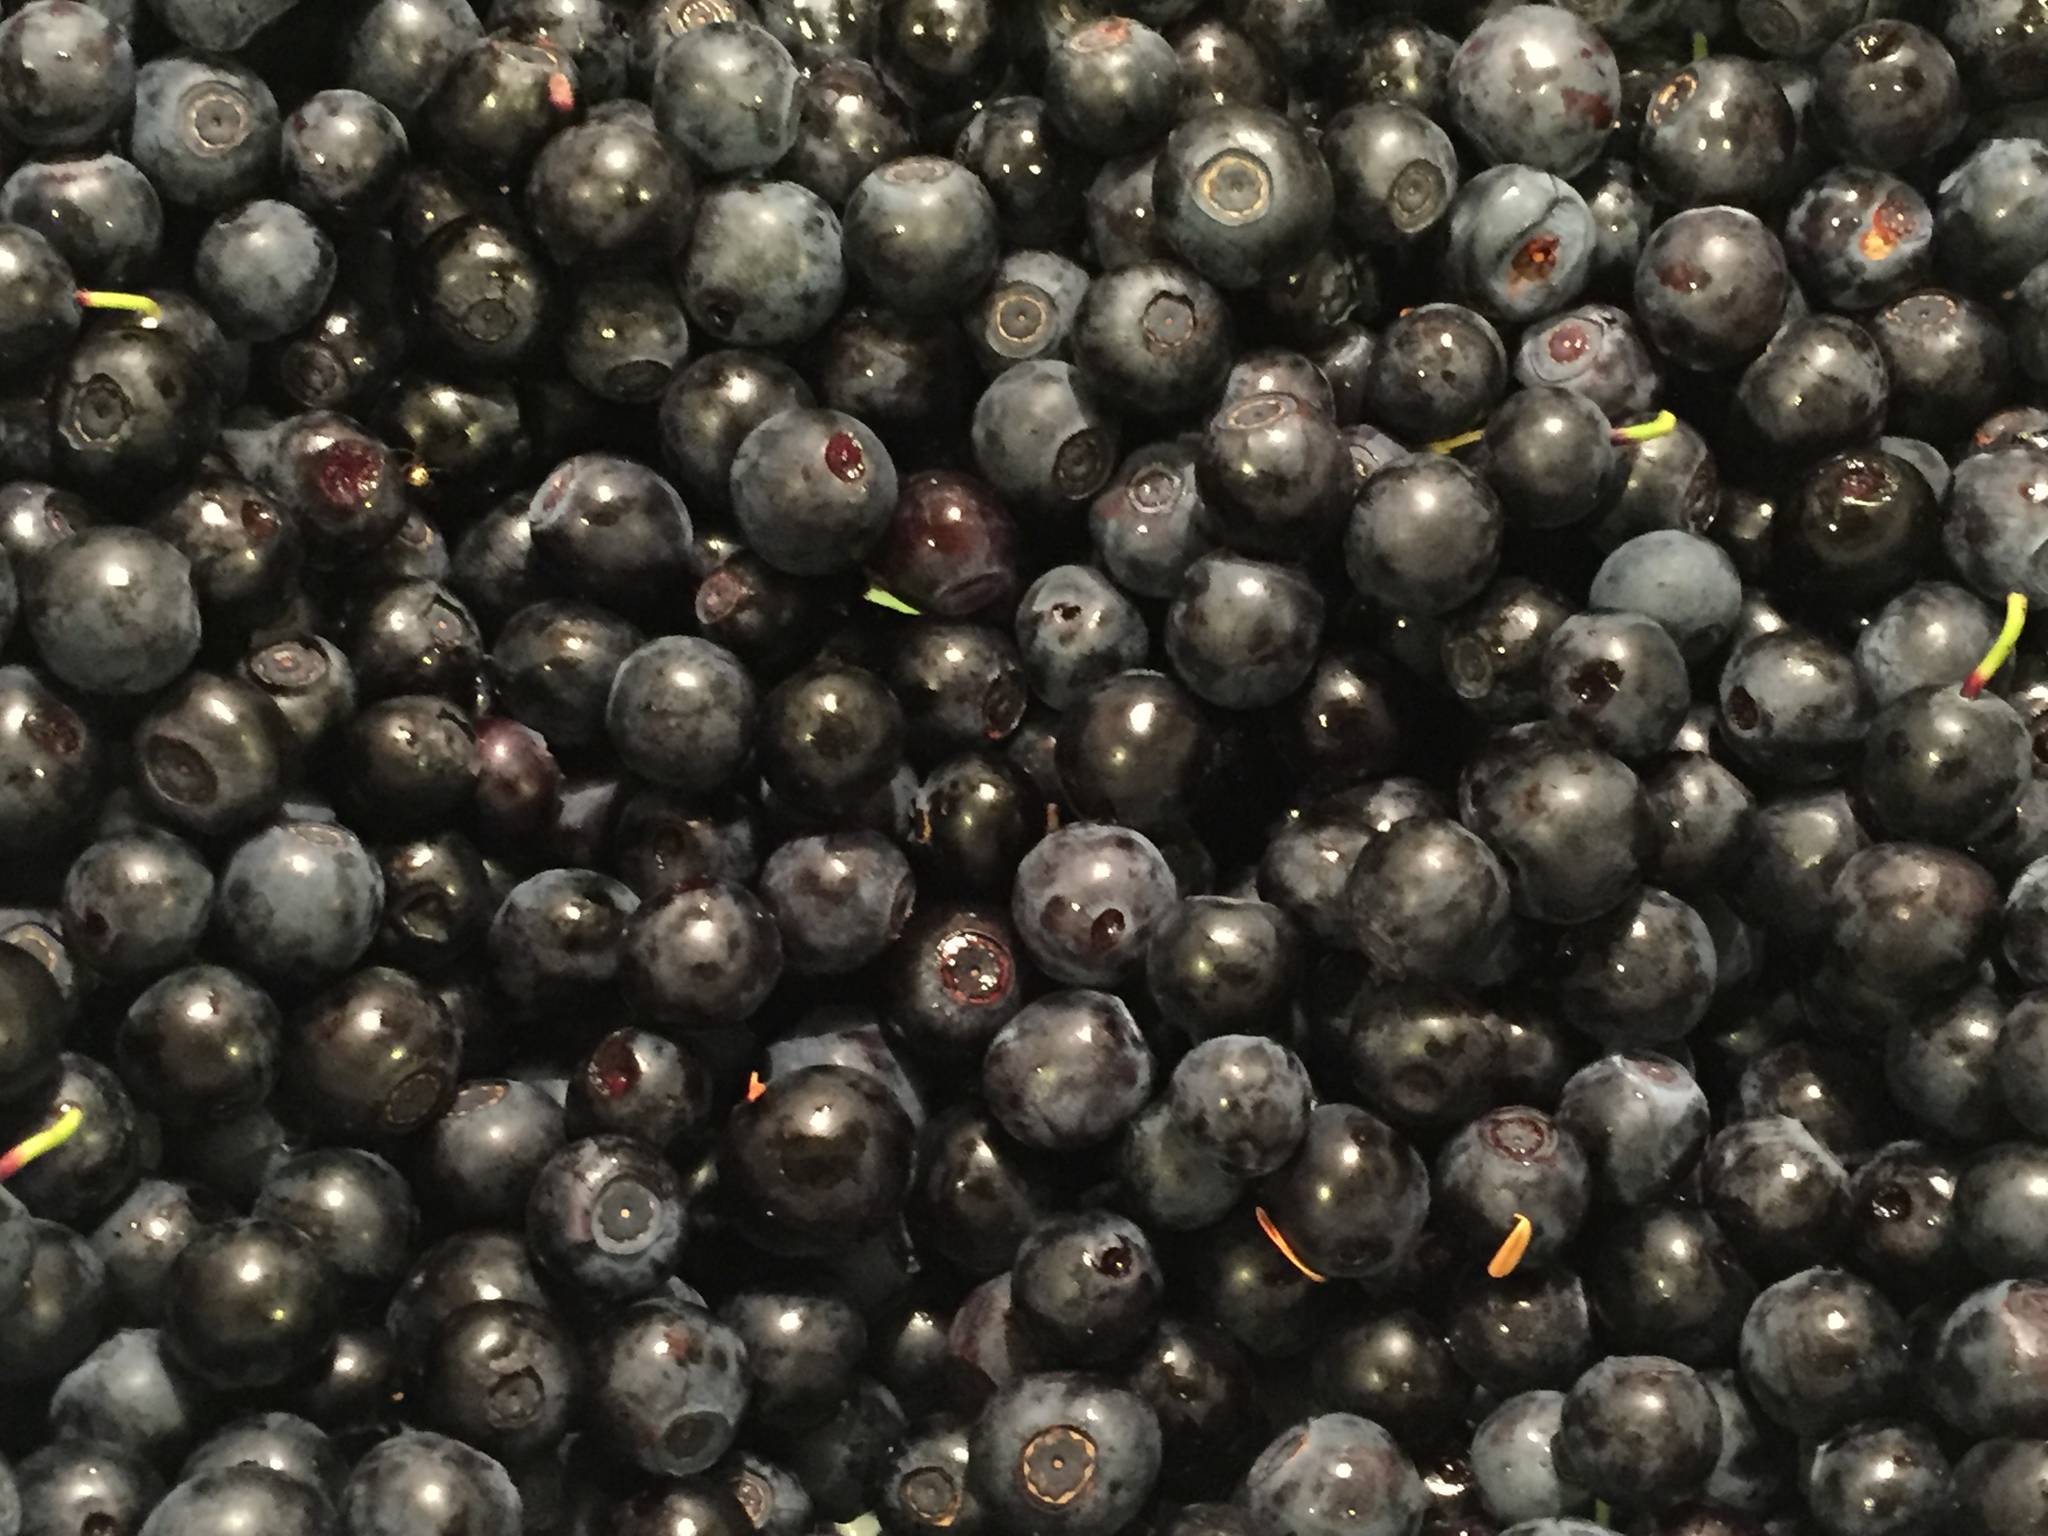 Blueberries and black huckleberries wait to be used for a variety of purposes. (Vivian Mork Yéilk’ | For the Capital City Weekly)